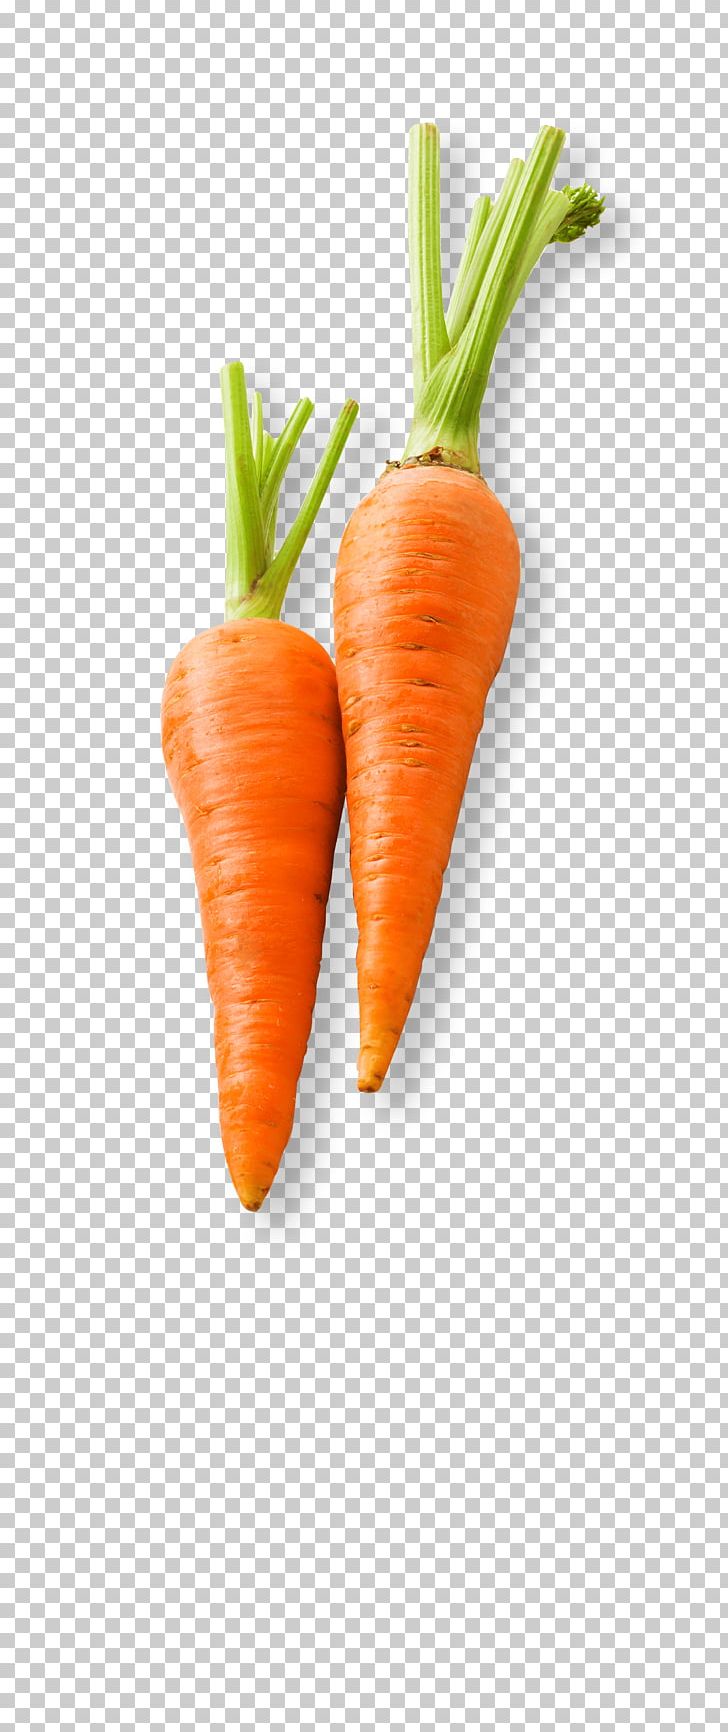 Baby Carrot Vegetable Food Carrot Cake PNG, Clipart, Baby Carrot, Baby Food, Carrot, Carrot Cake, Carrot Seed Oil Free PNG Download